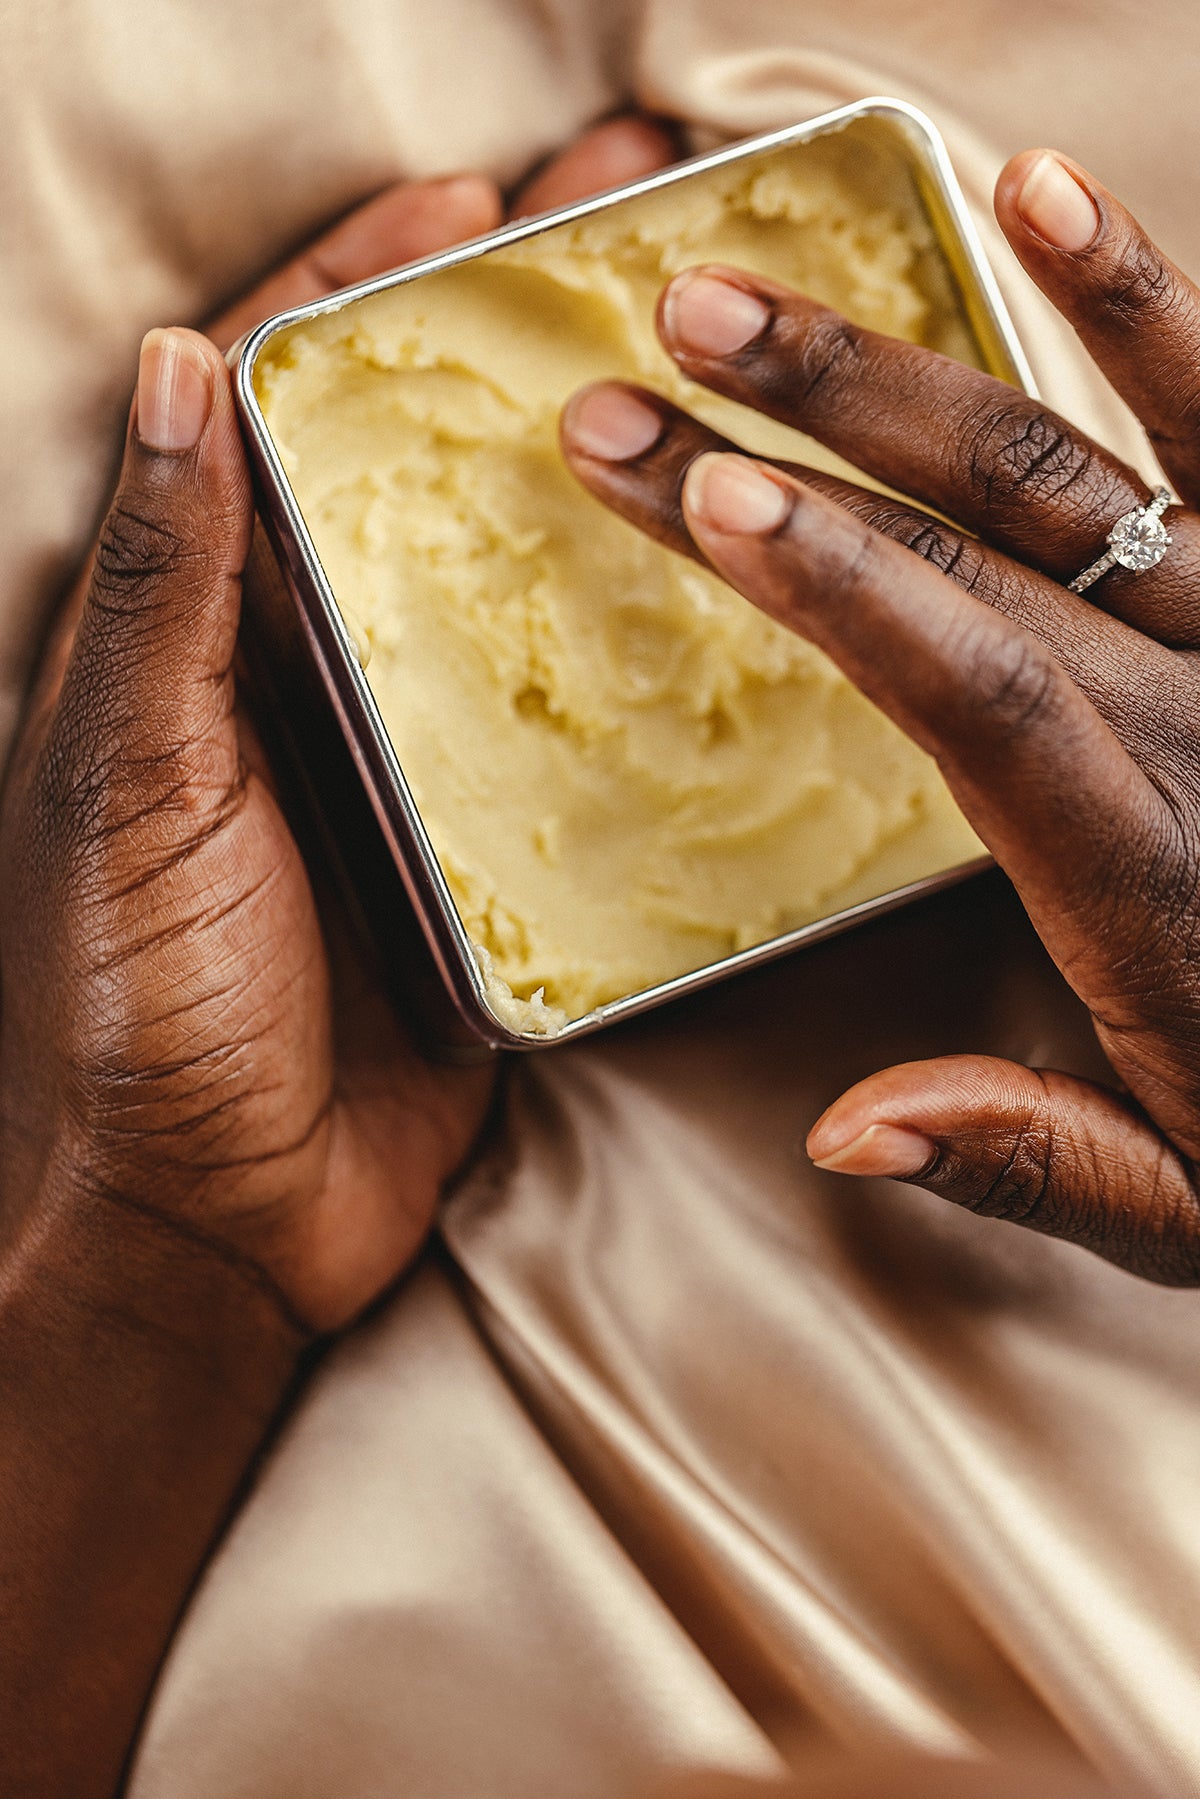 Hand reaching into a large tin of shea butter to moisturize. on a soft background